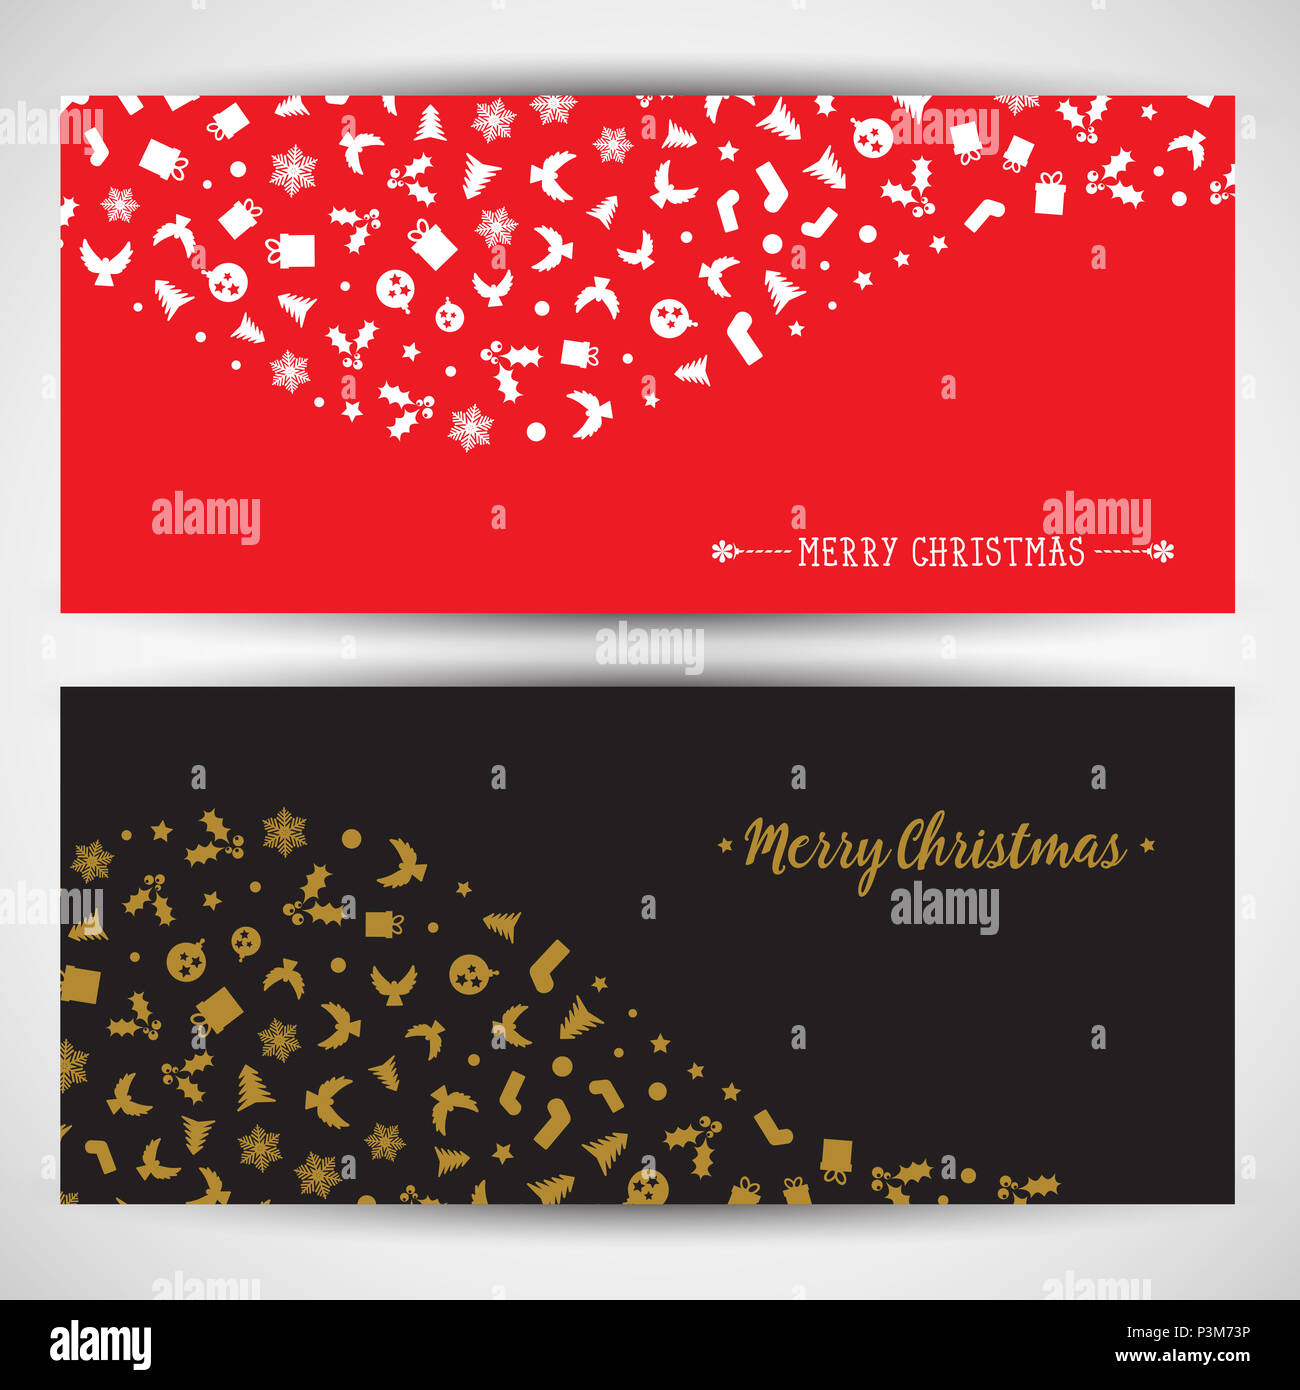 Decorative Christmas backgrounds with various icons Stock Photo